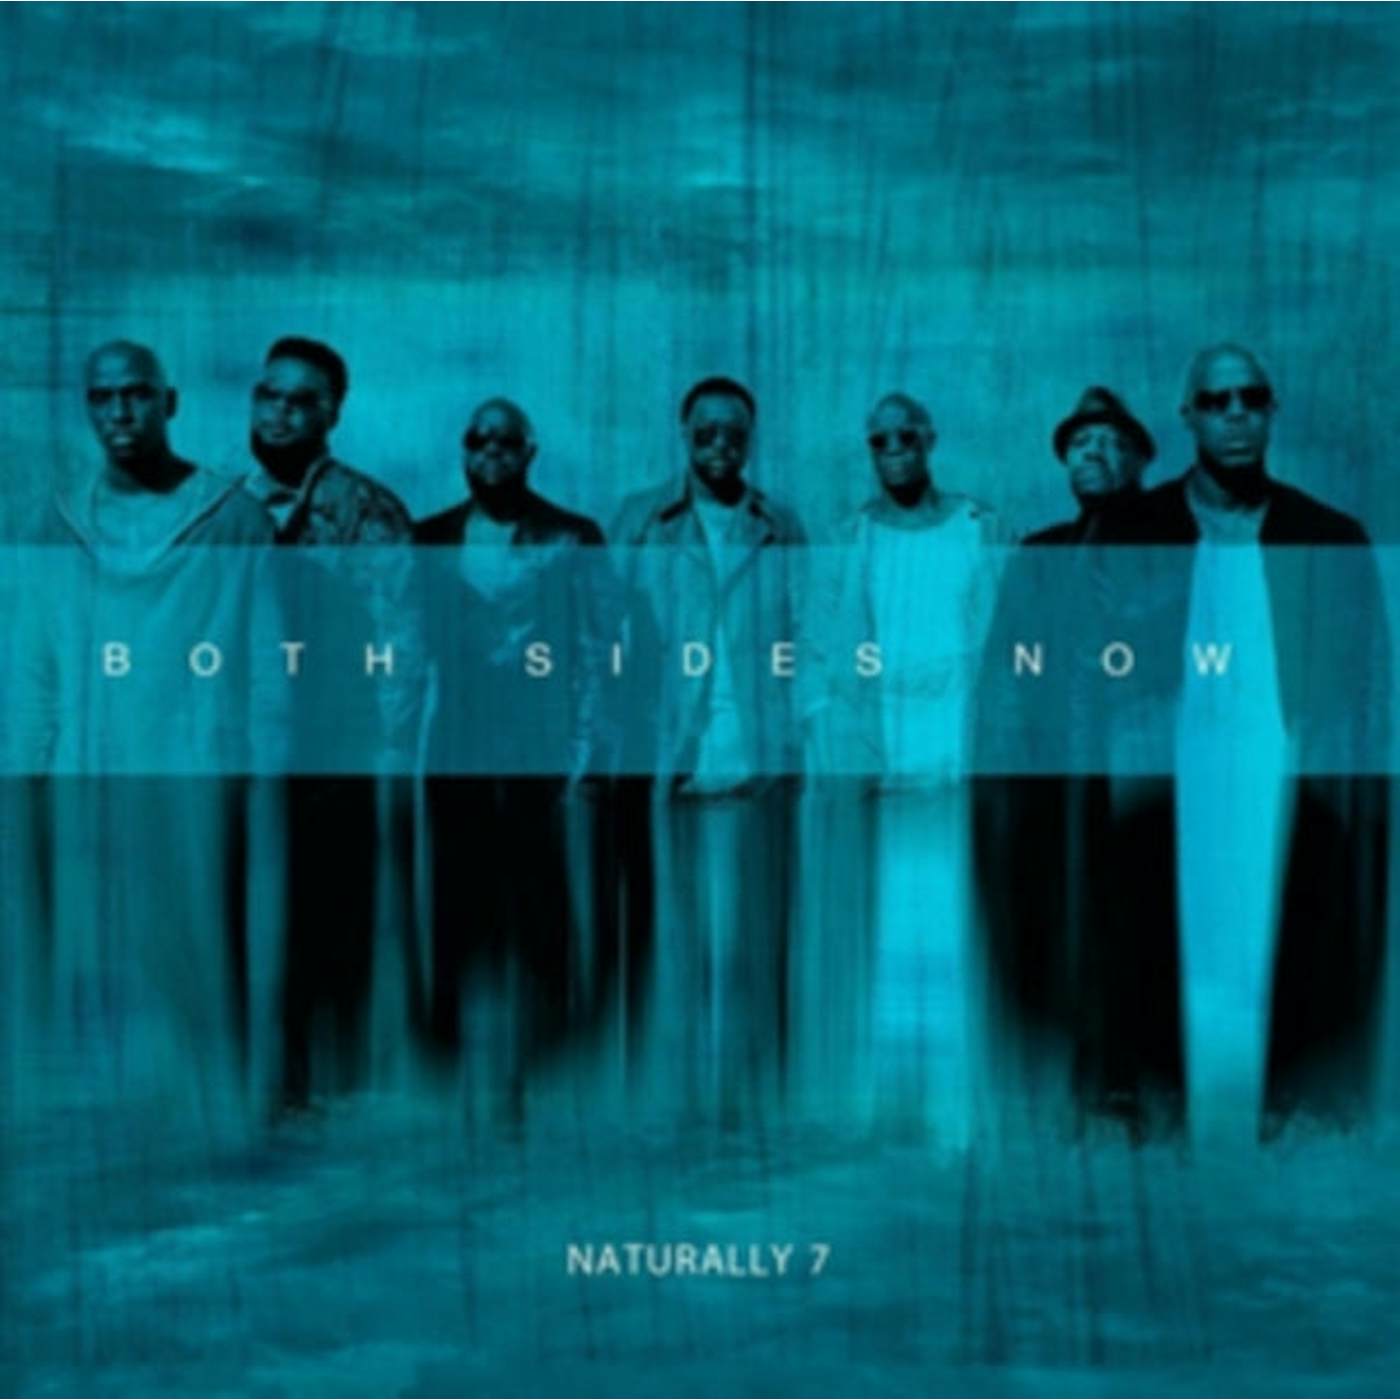 Naturally 7 LP Vinyl Record - Both Sides Now